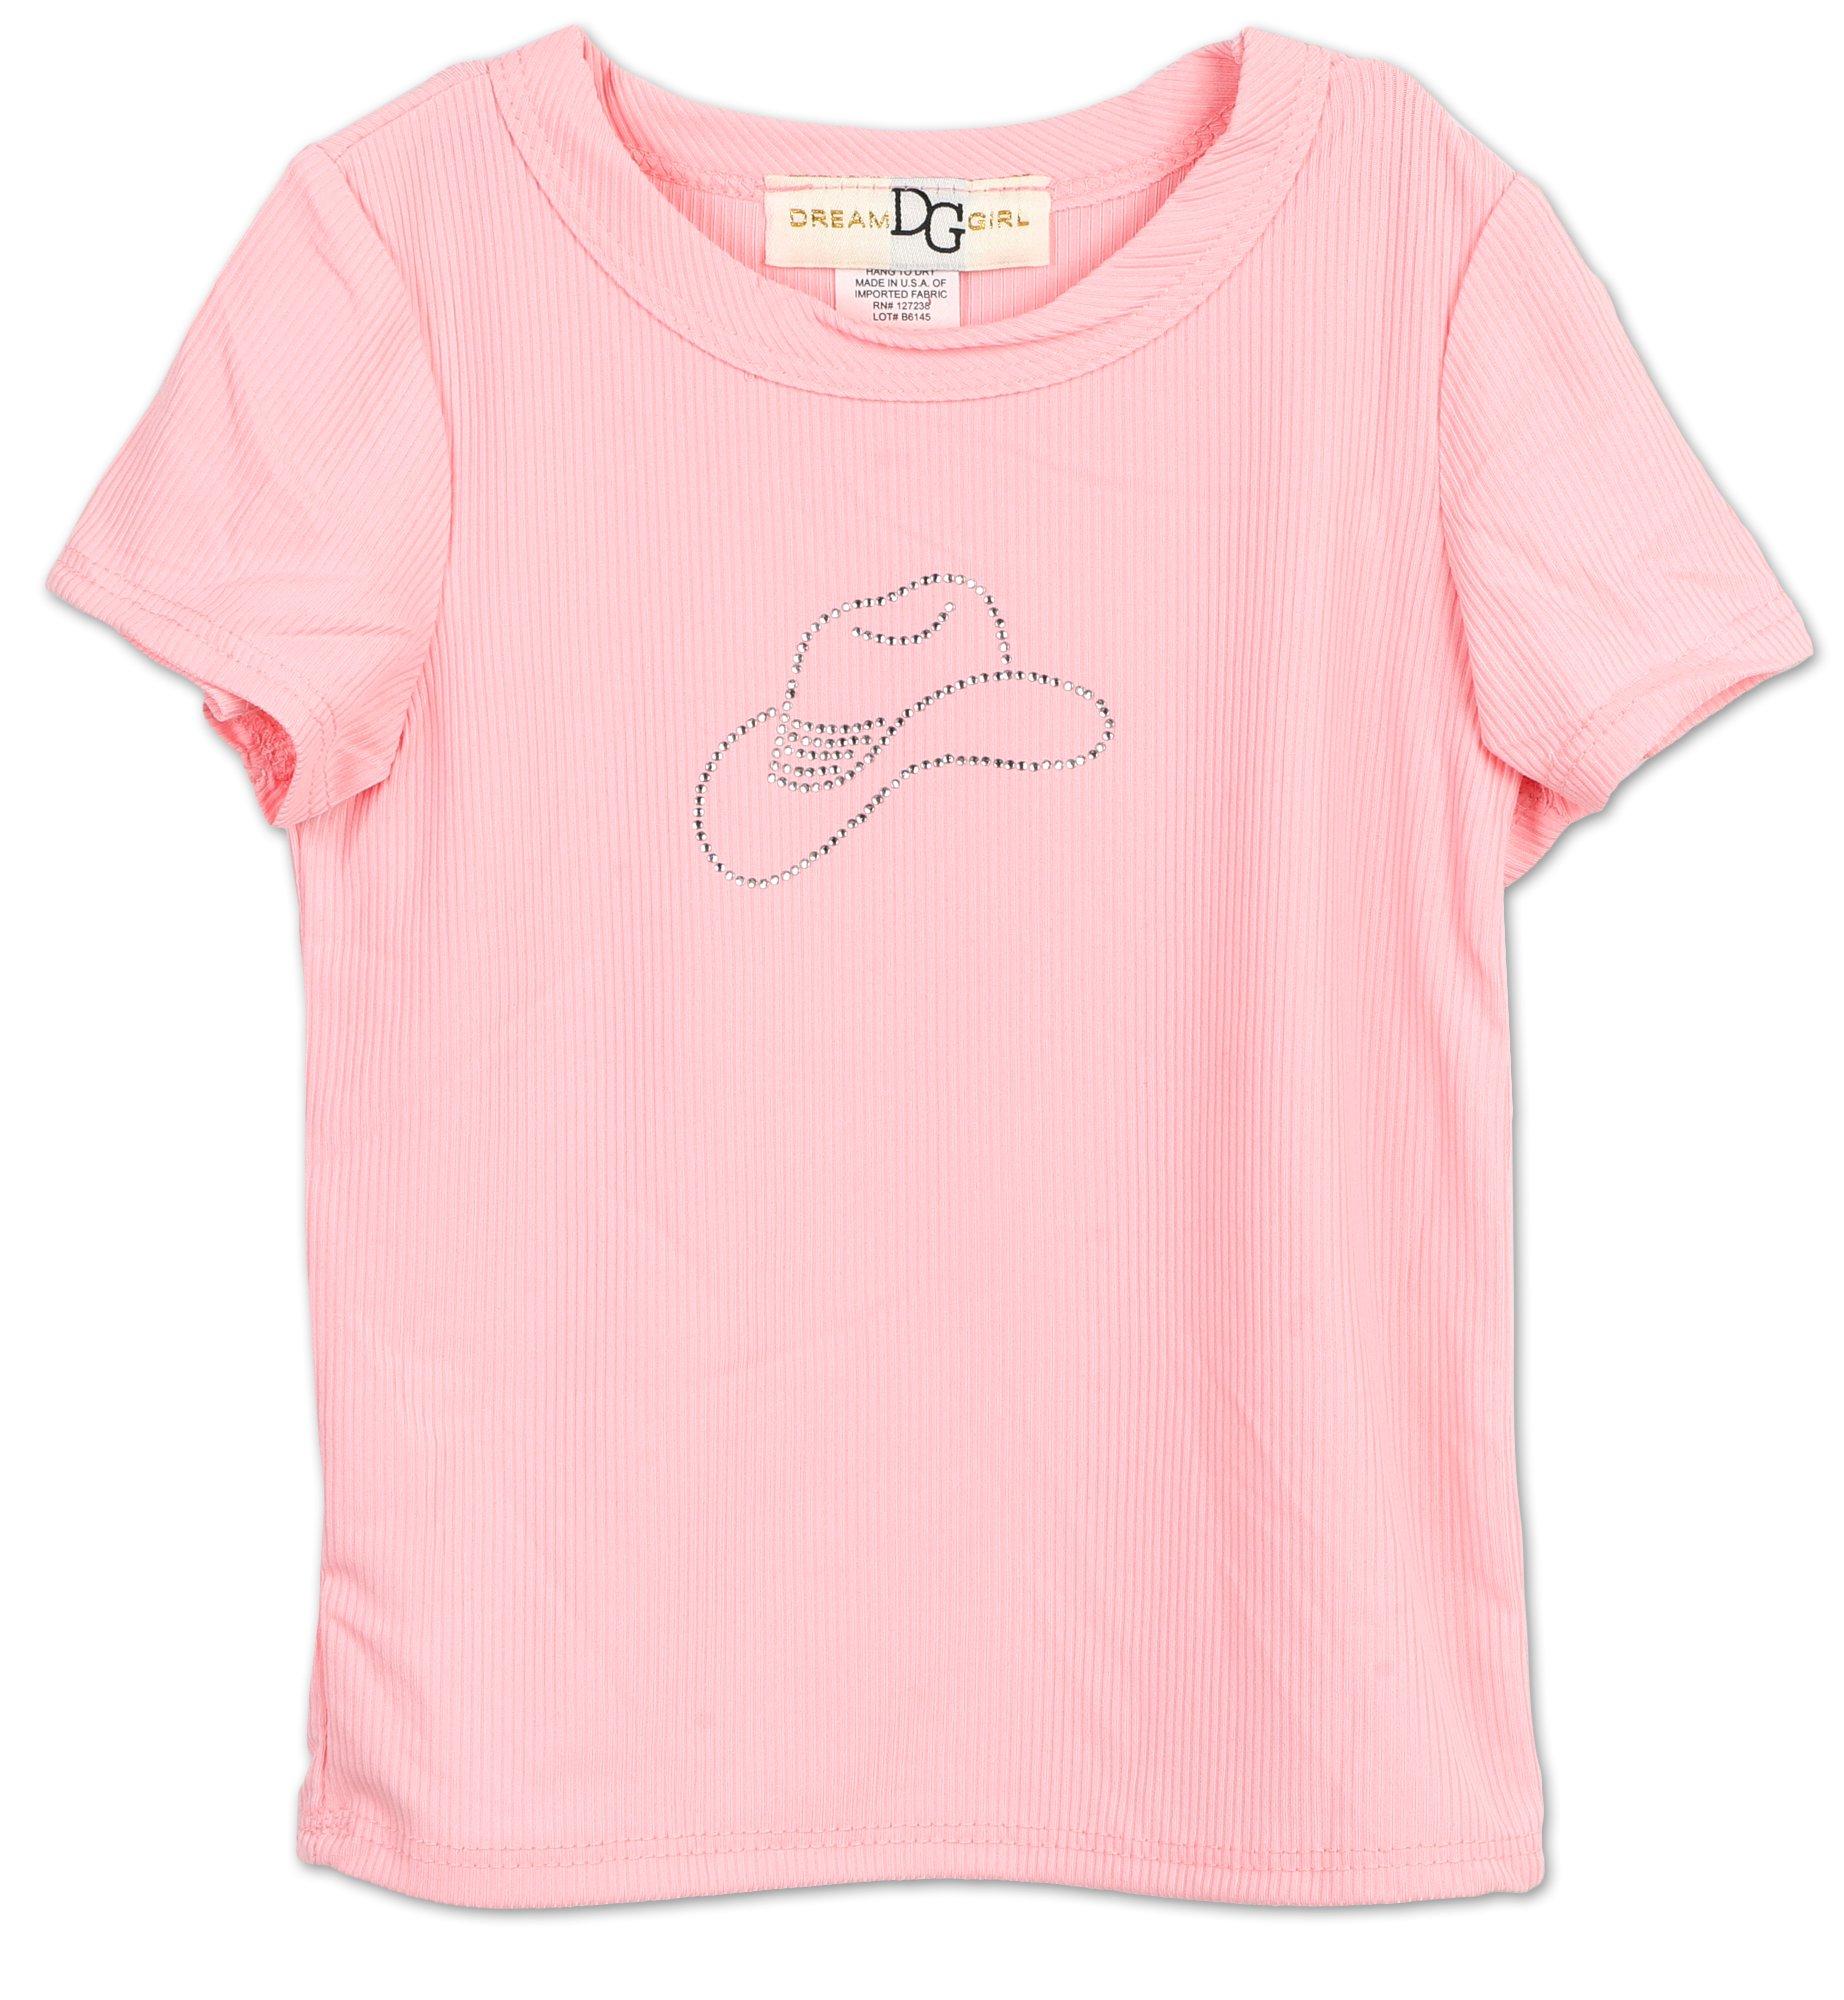 Little Girls Studded Cowgirl Hat Top - Pink